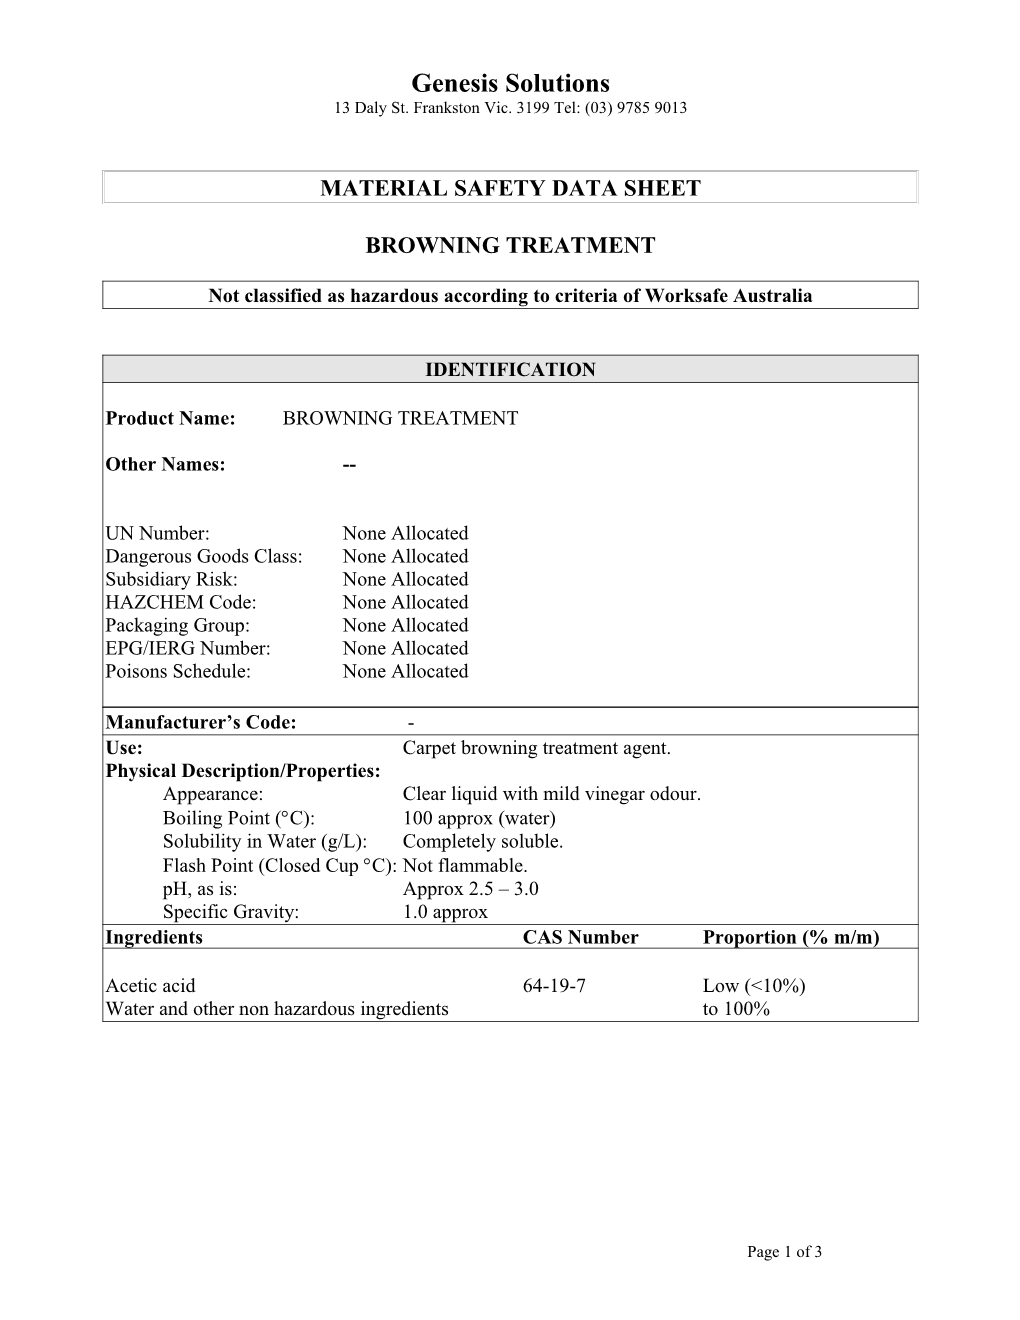 Material Safety Data Sheet s37